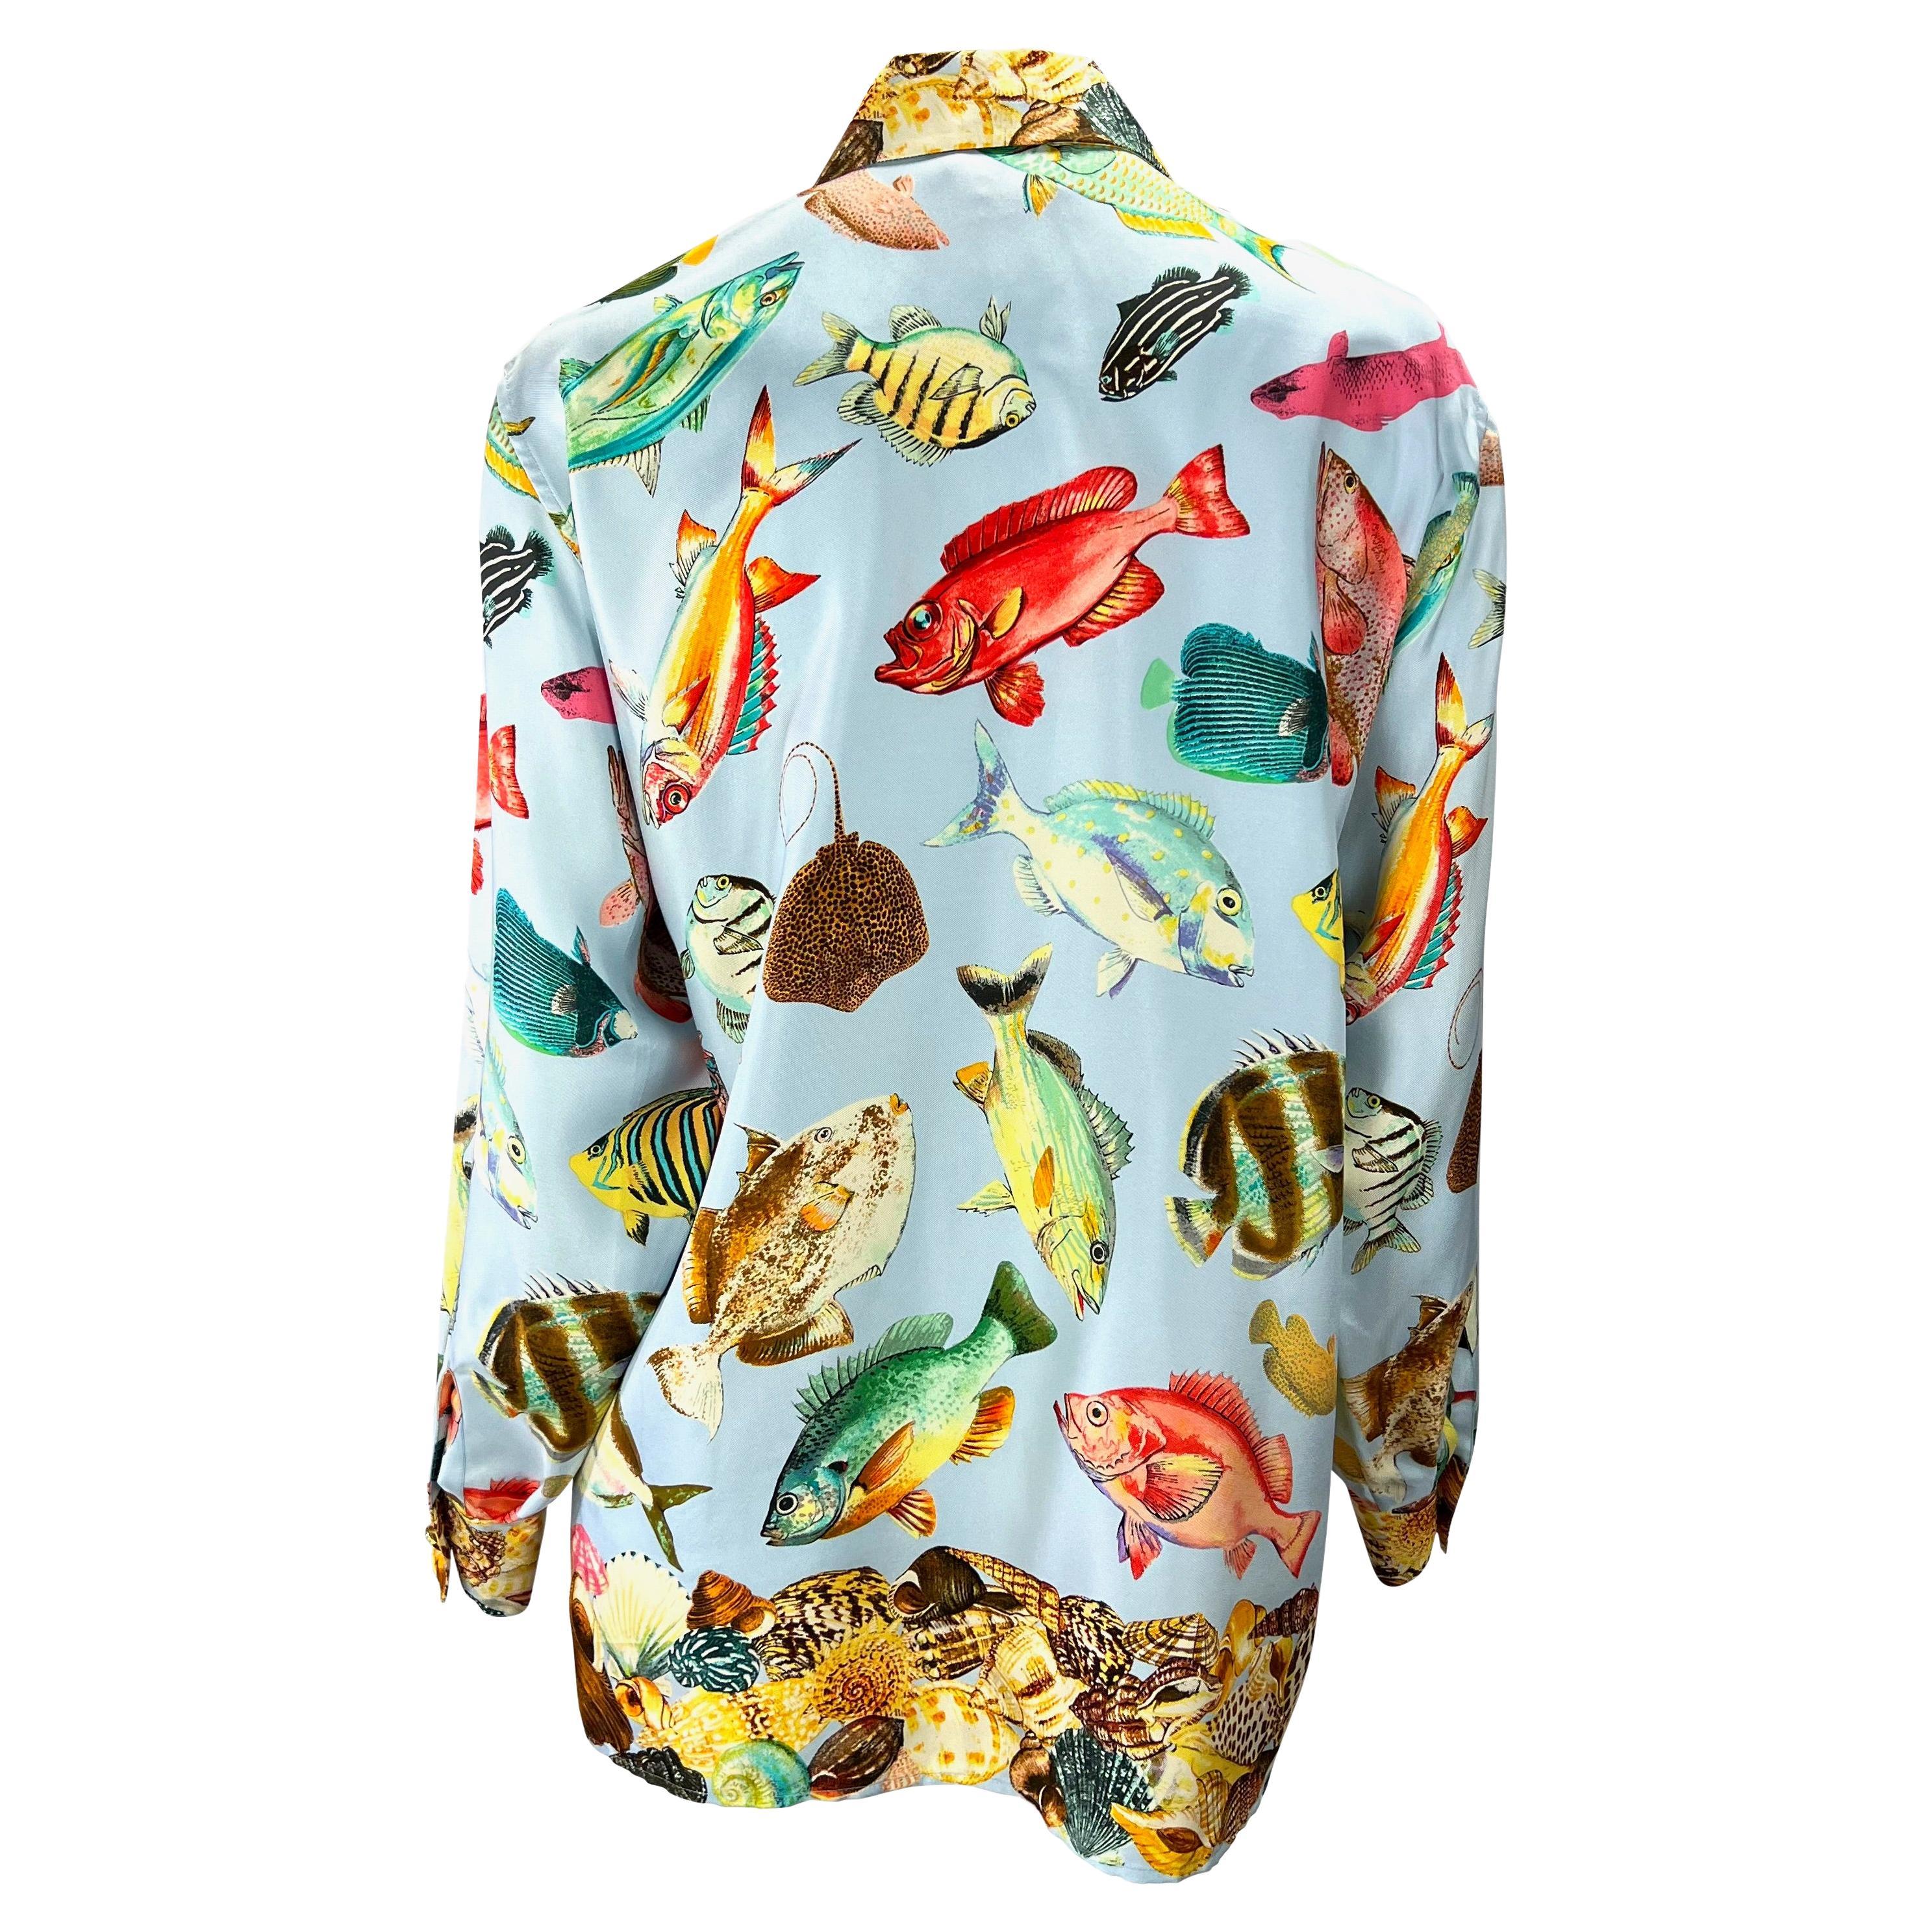 S/S 1992 Gucci Runway Ad Blue Sea Life Fish Print GG Logo Button Up Blouse In Good Condition For Sale In West Hollywood, CA